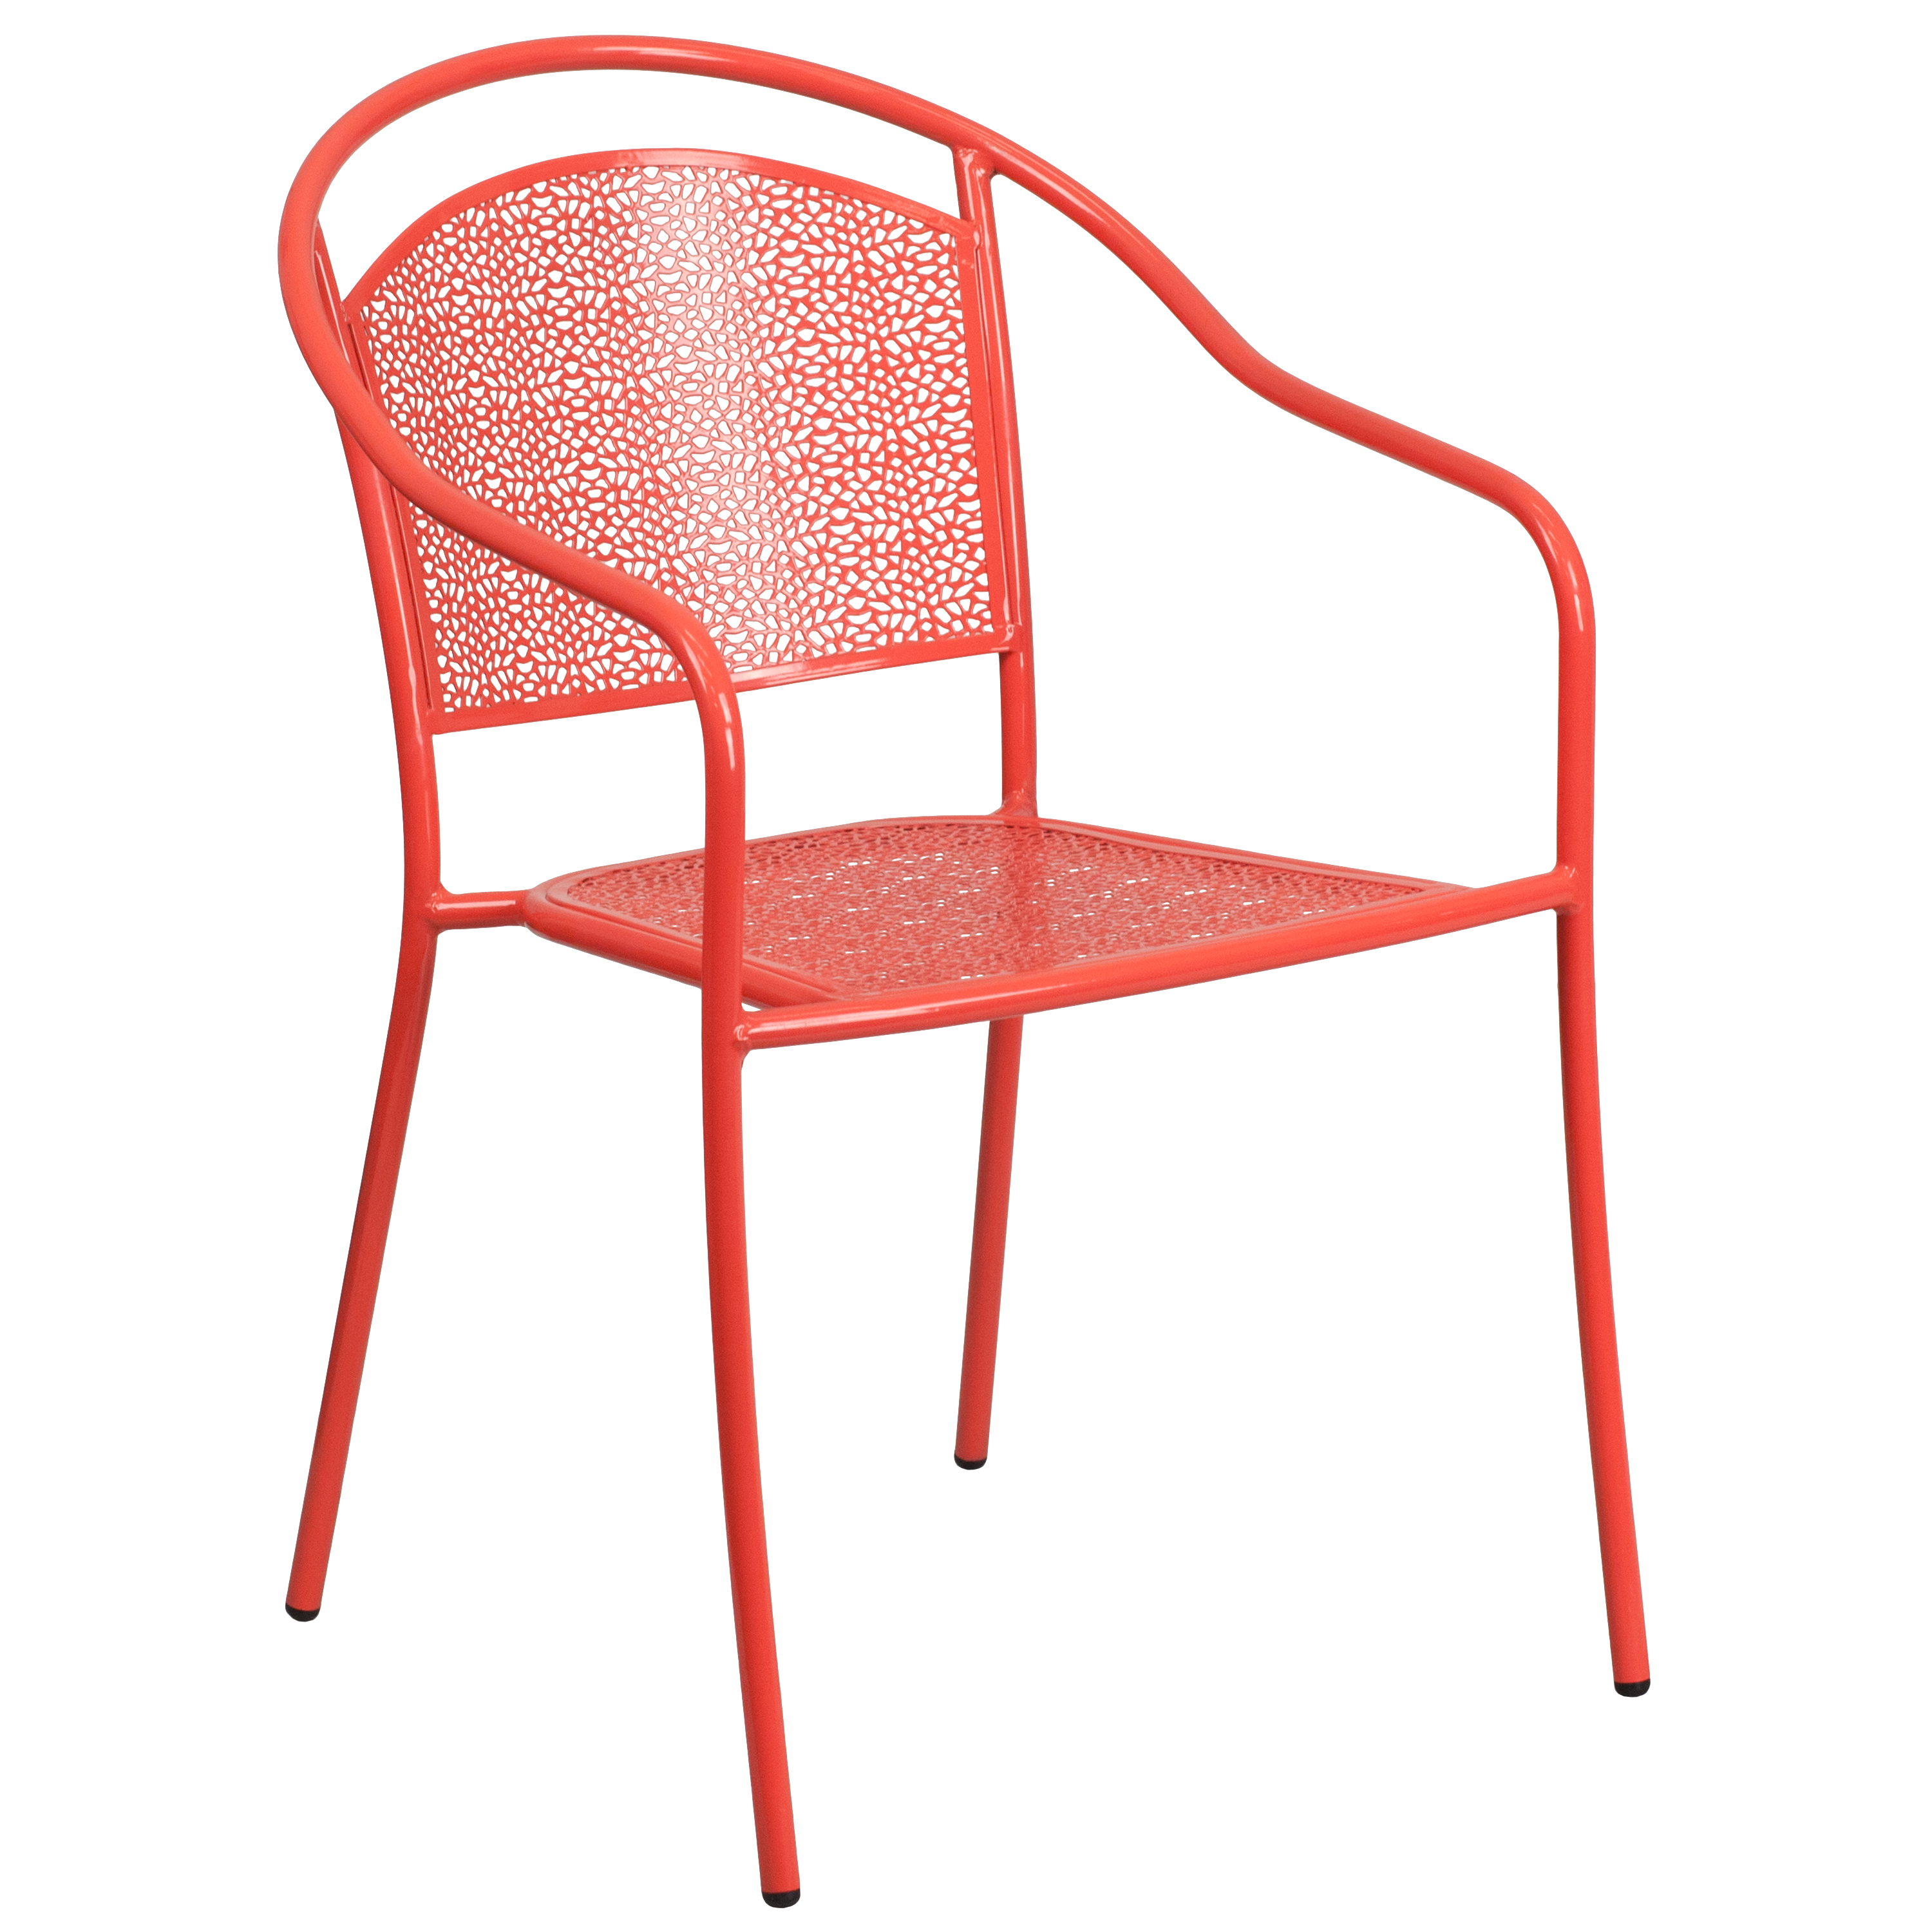 Flash Furniture Commercial Grade 35.25" Round Coral Indoor-Outdoor Steel Patio Table Set with 4 Round Back Chairs - image 5 of 5